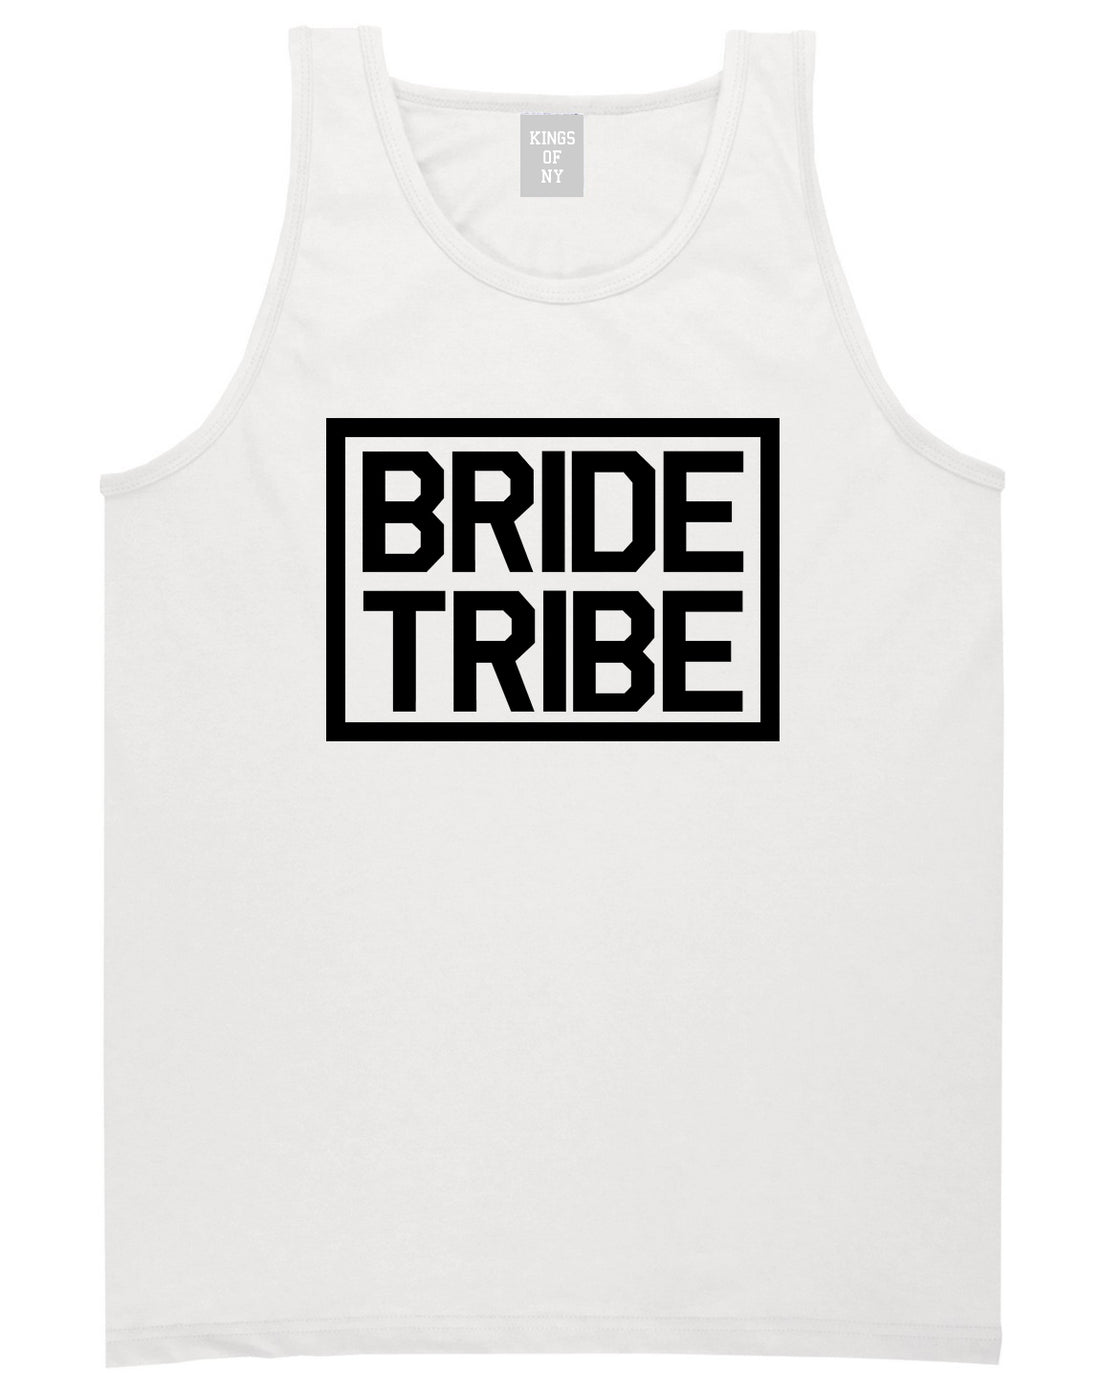 Bride Tribe Bachlorette Party White Tank Top Shirt by Kings Of NY